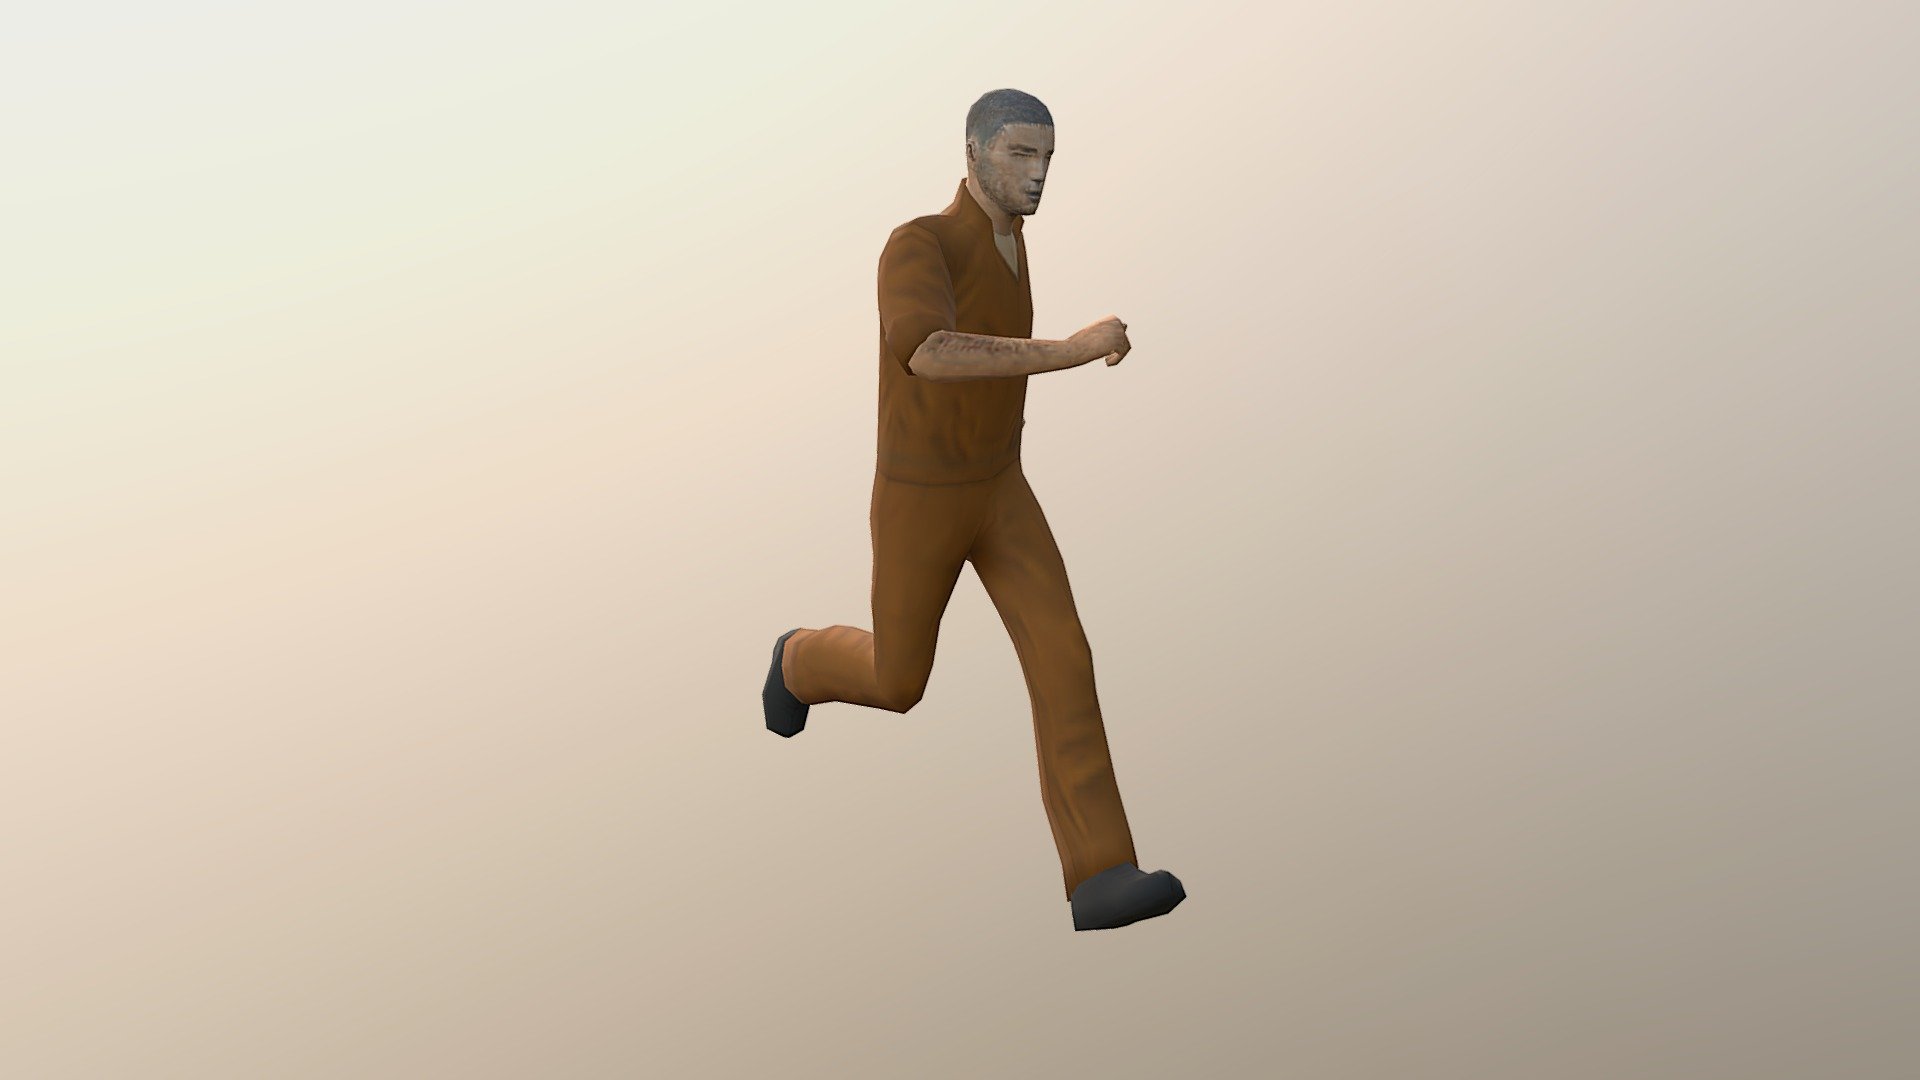 Jumpsuit man;
Lowpoly model with looks similar to GTA 3 or PS1-like models;
Work in progress;
Fix some UV &amp; texture; - Jumpsuit man [WIP] - 3D model by Farid (@rev3n4nt) 3d model